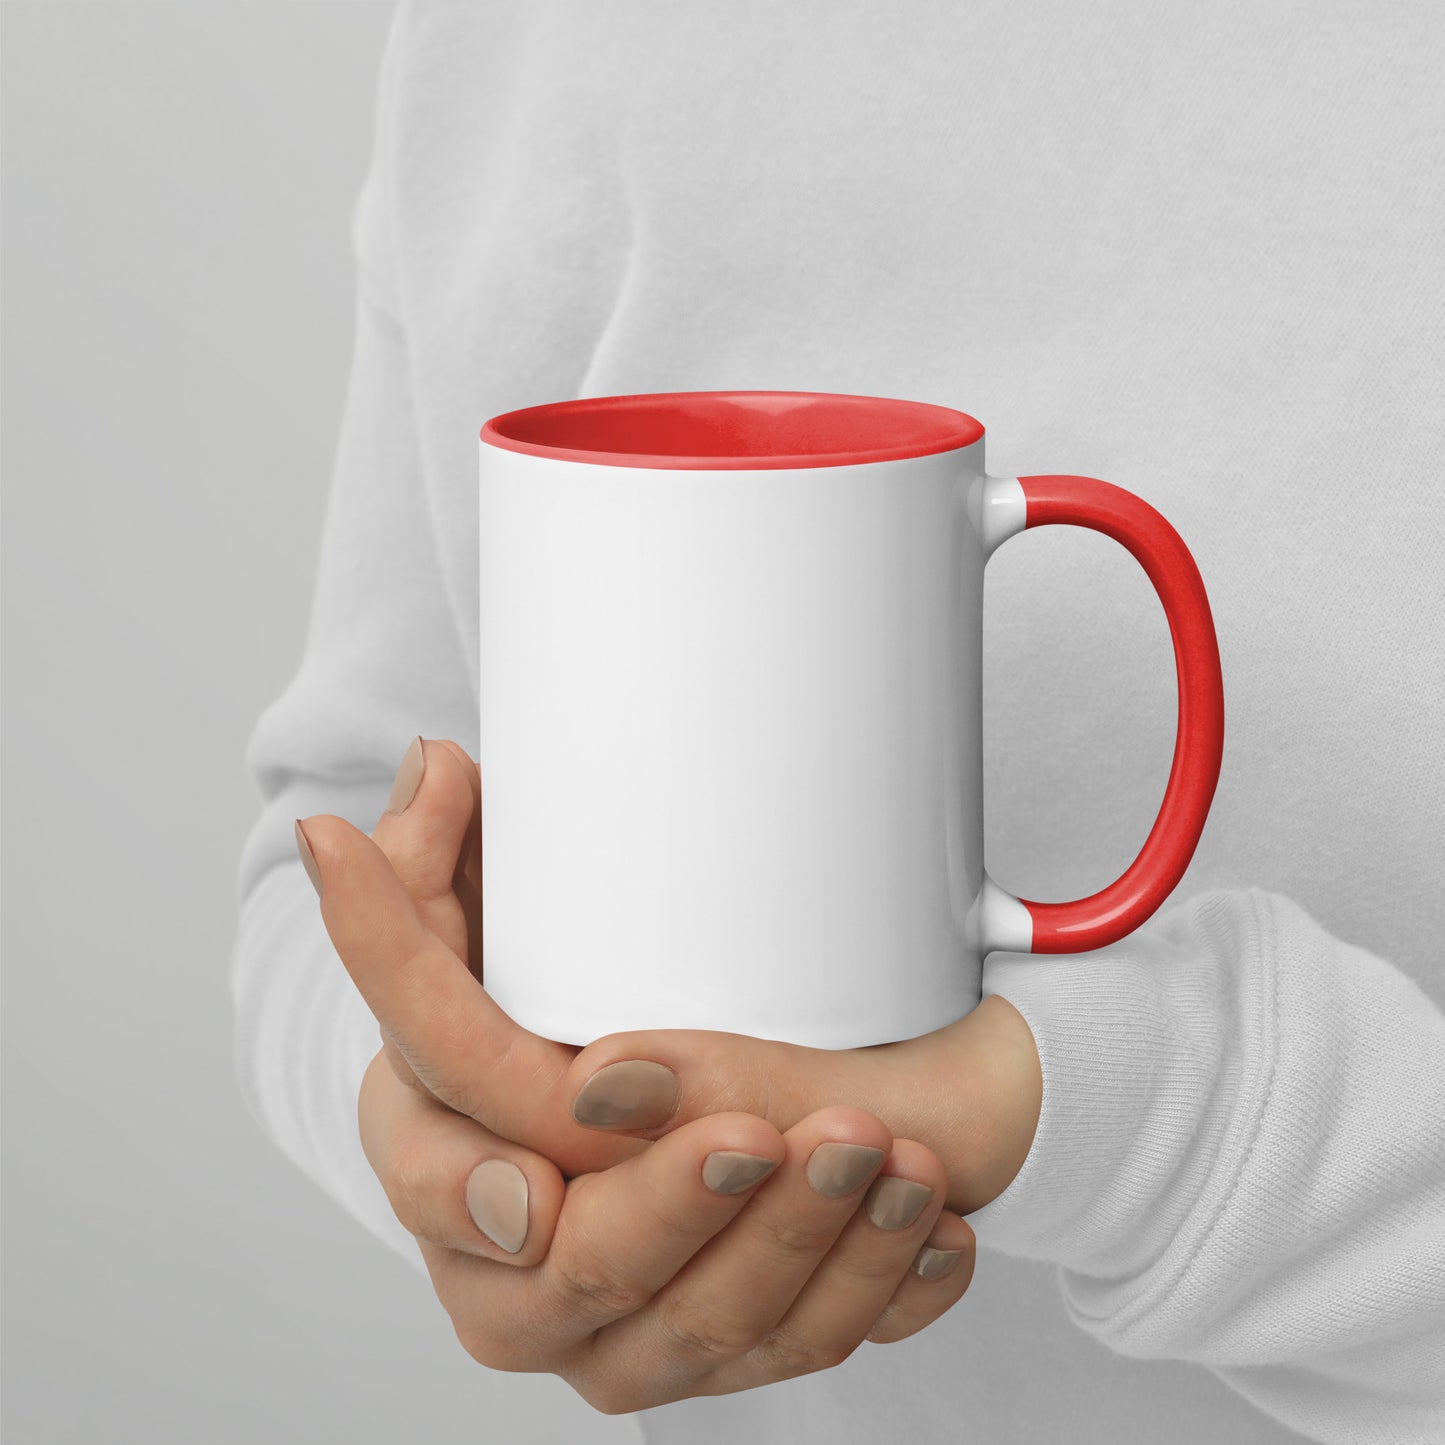 'It's Just my Sauce' Mug with Color Inside